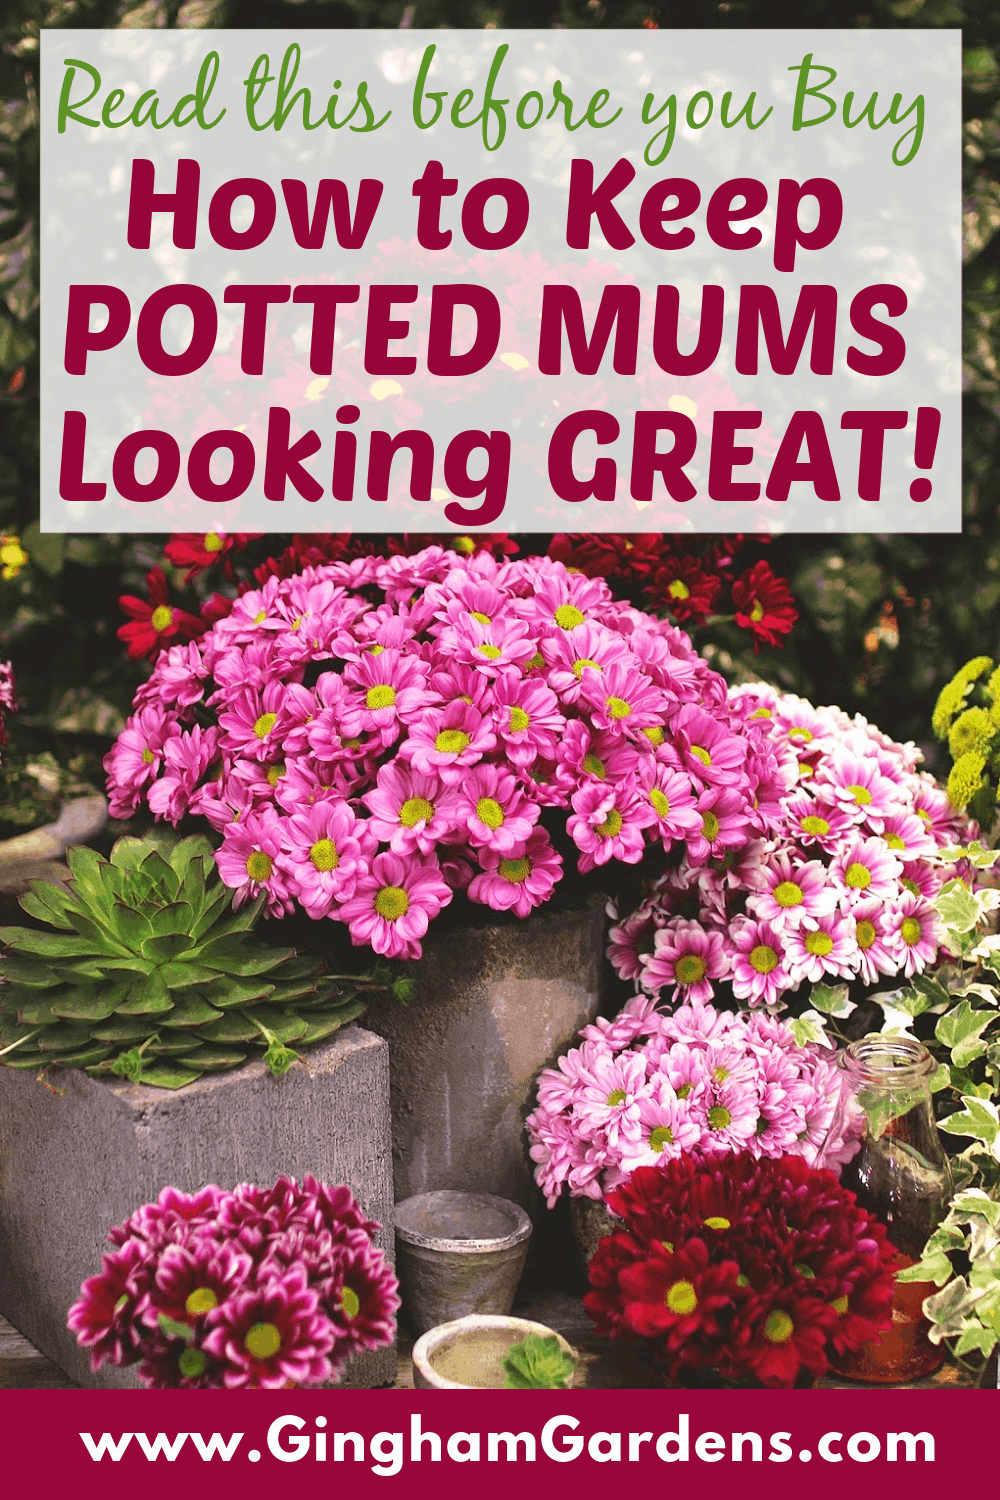 Image of Mum Flowers with Text Overlay - How to Keep Potted Mums Looking Great